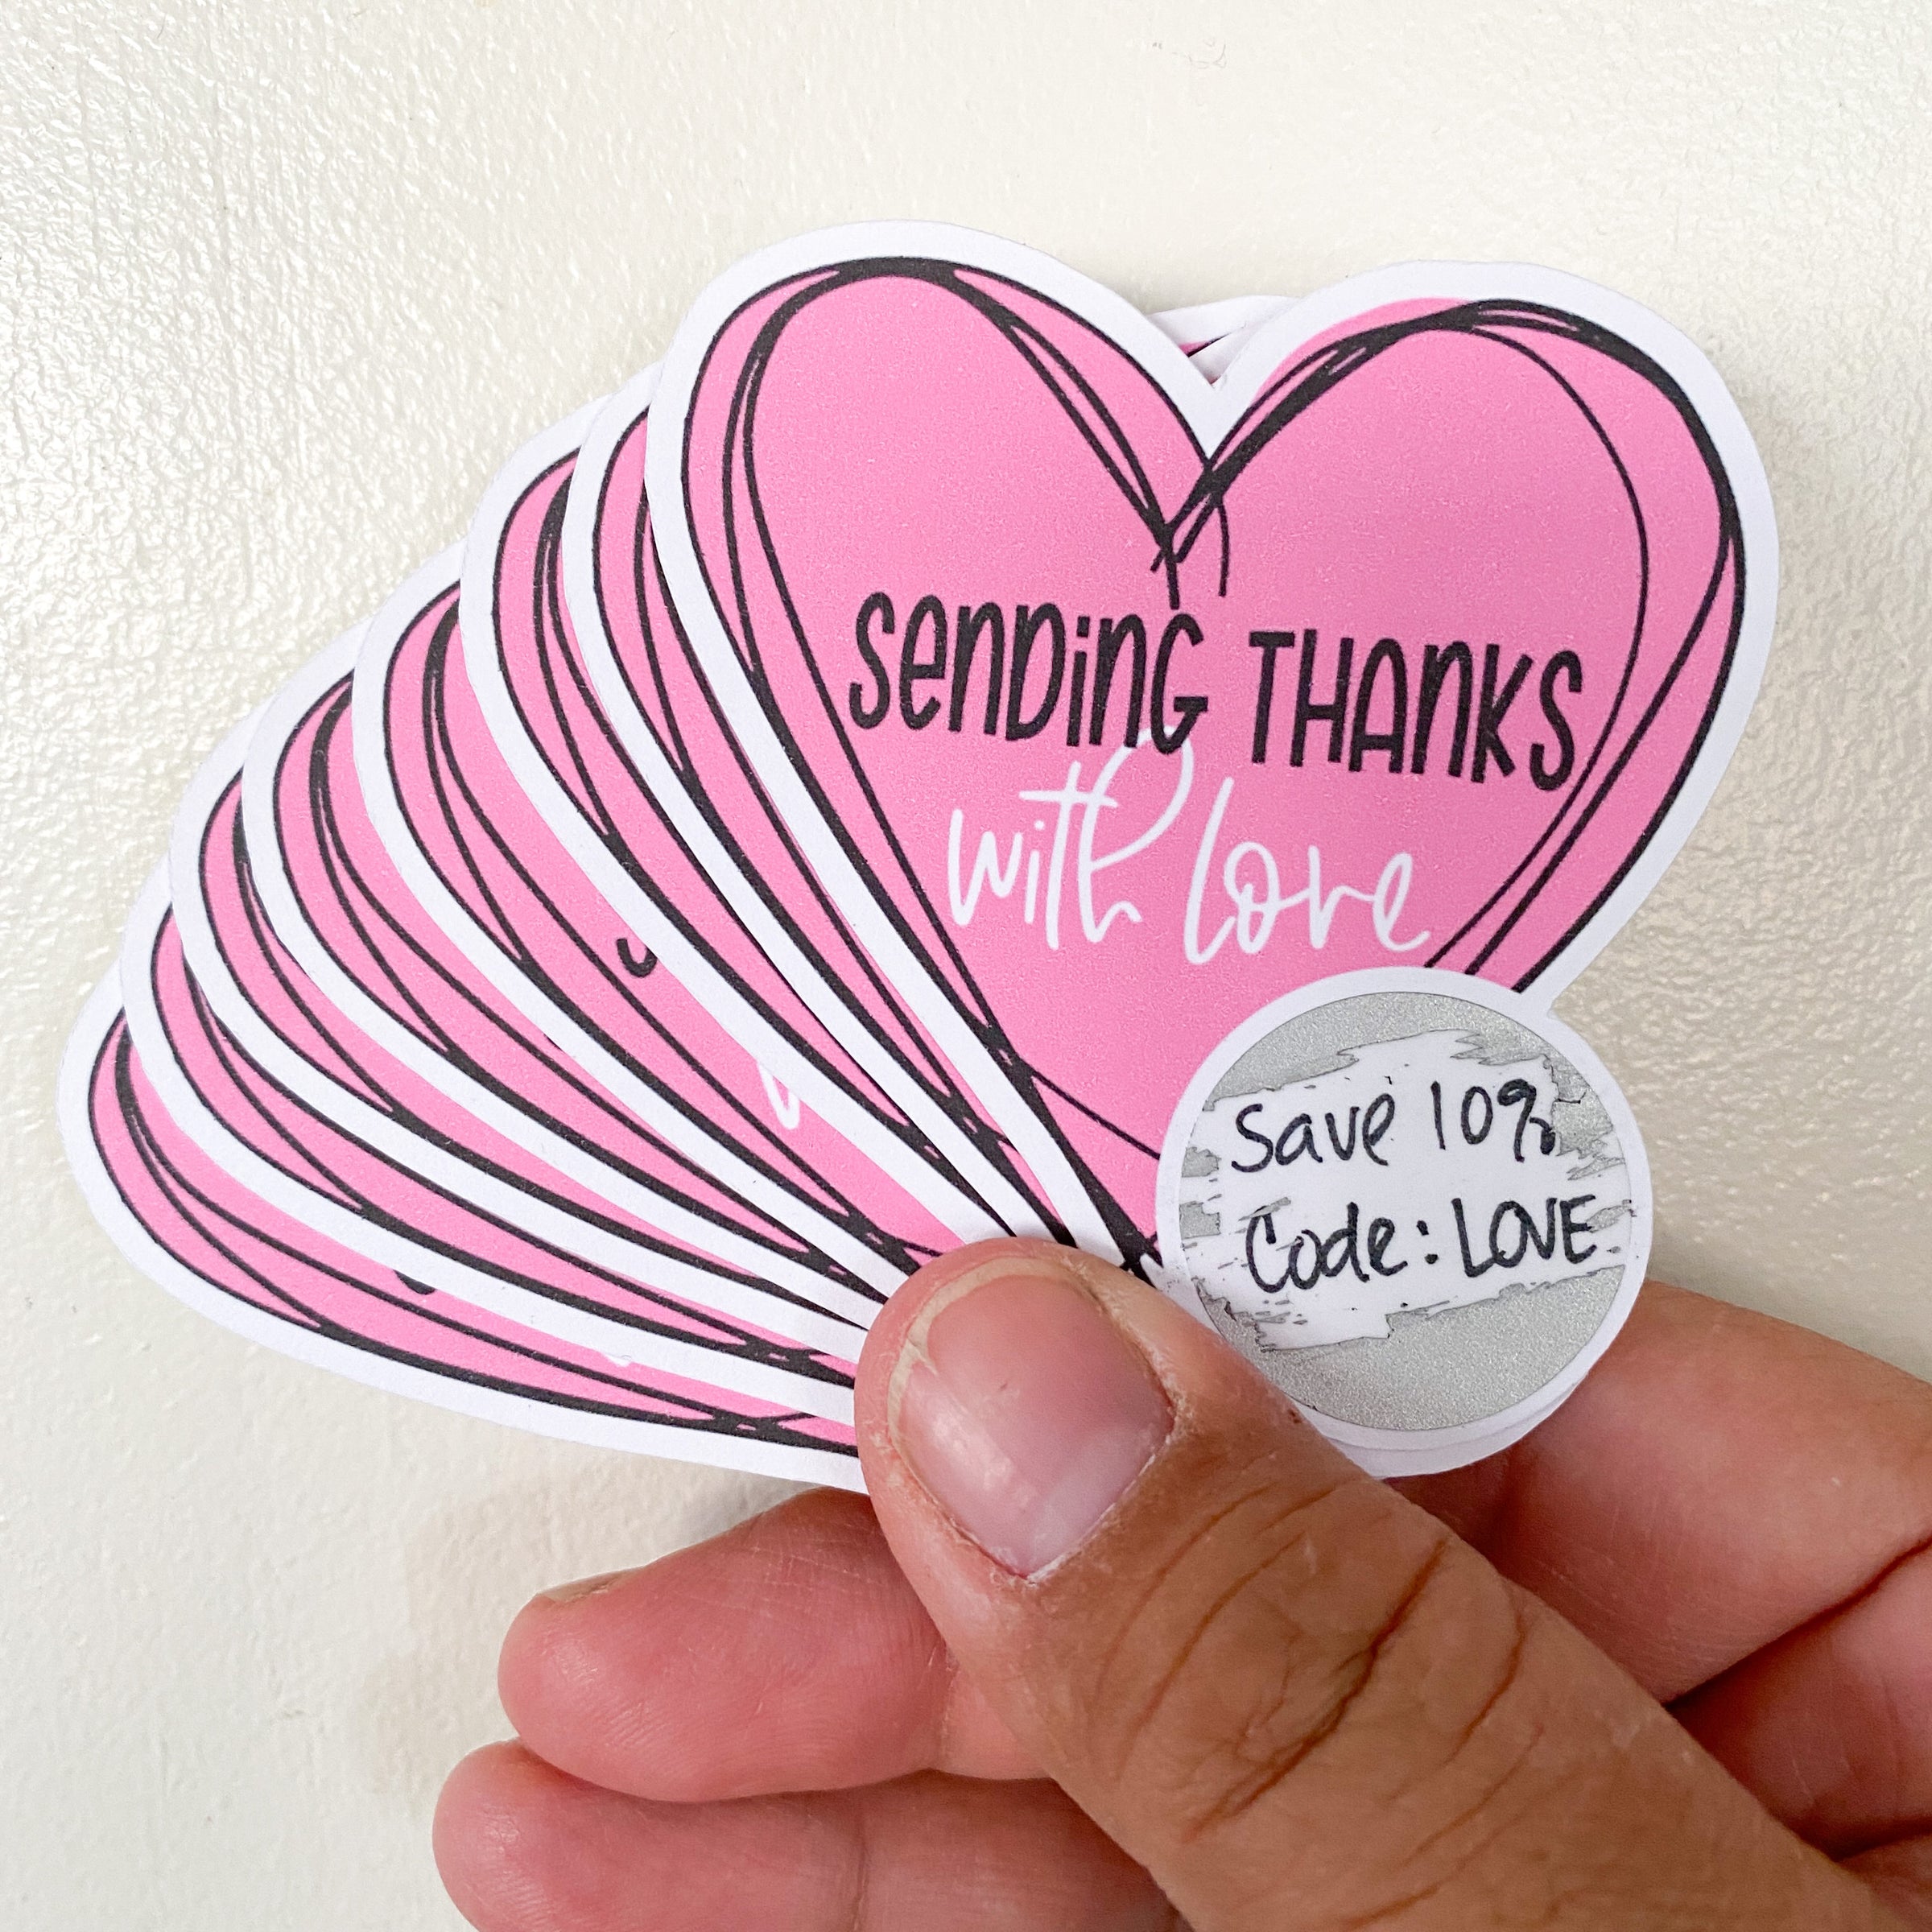 Sending Thanks with Love Scratcher - Individually Cut